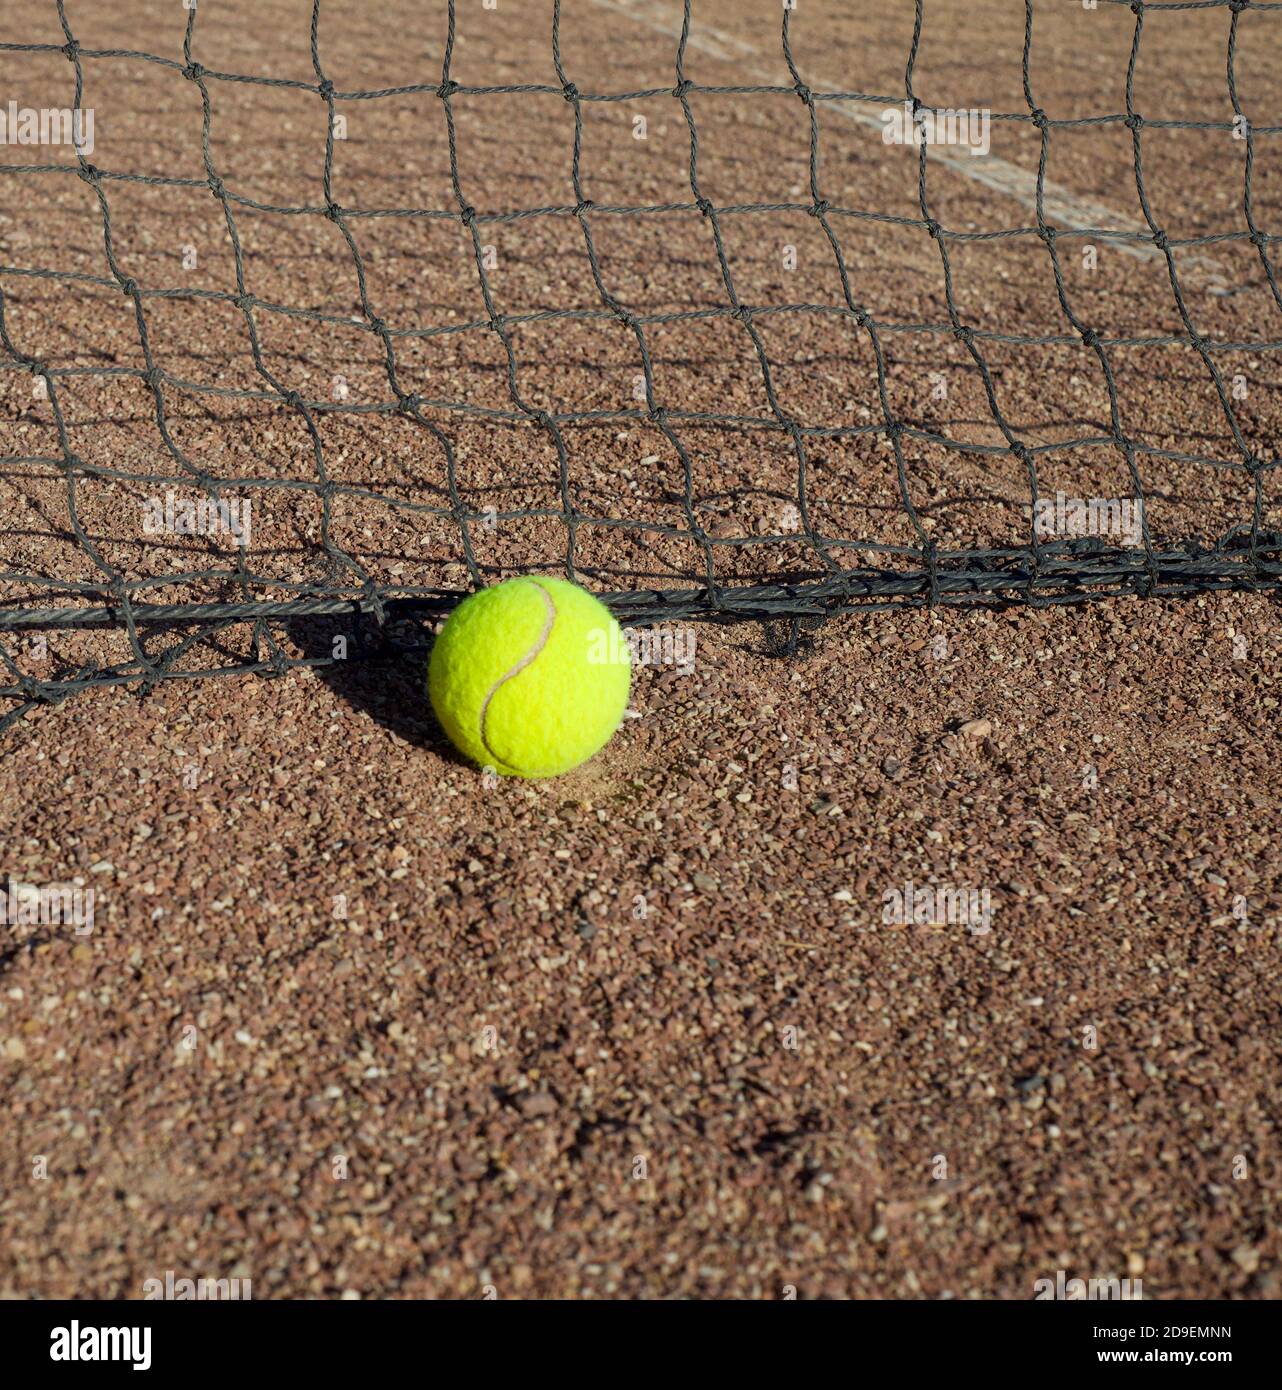 Tennis ball on the tennis court. Priming. Grid. Copy space for text. Stock Photo